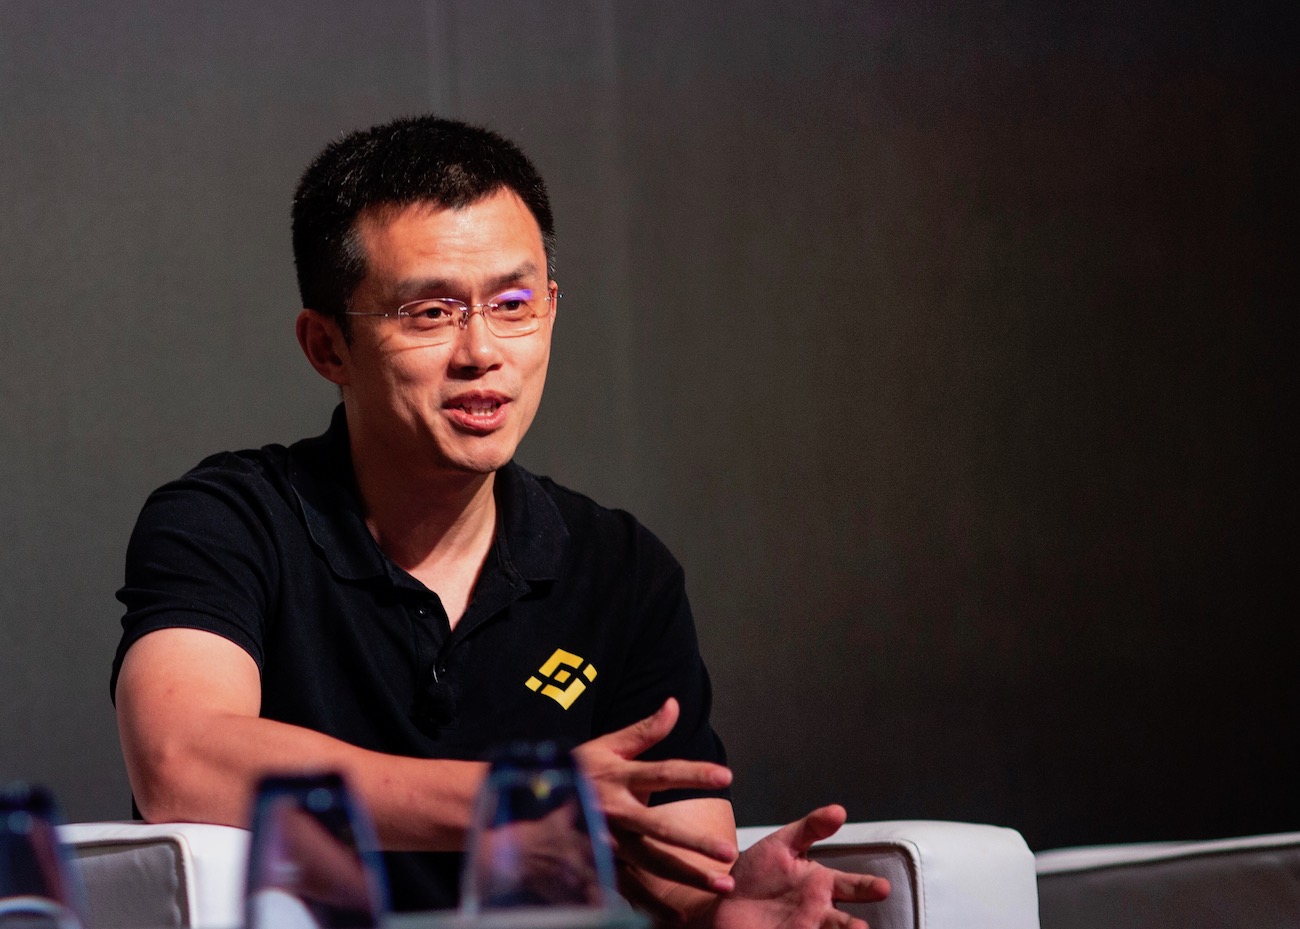 Binance in Talks for Regulatory Approval in Germany, CEO Says